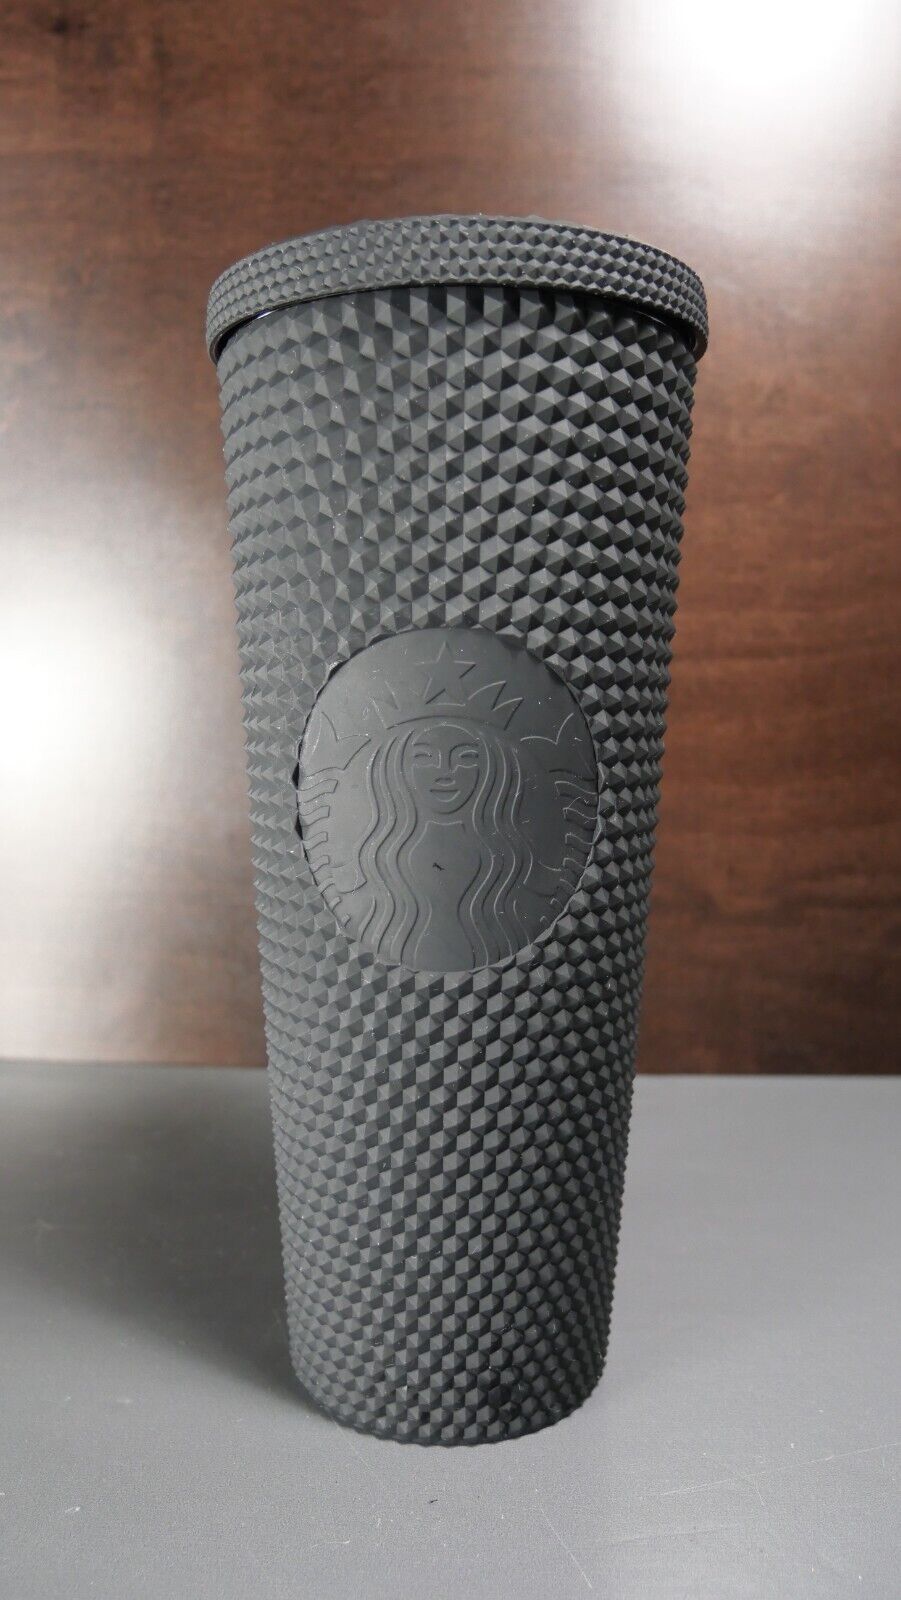 Starbucks Inspired Black Studded Textured Tumbler Plastic Cold Drink Cup 24oz